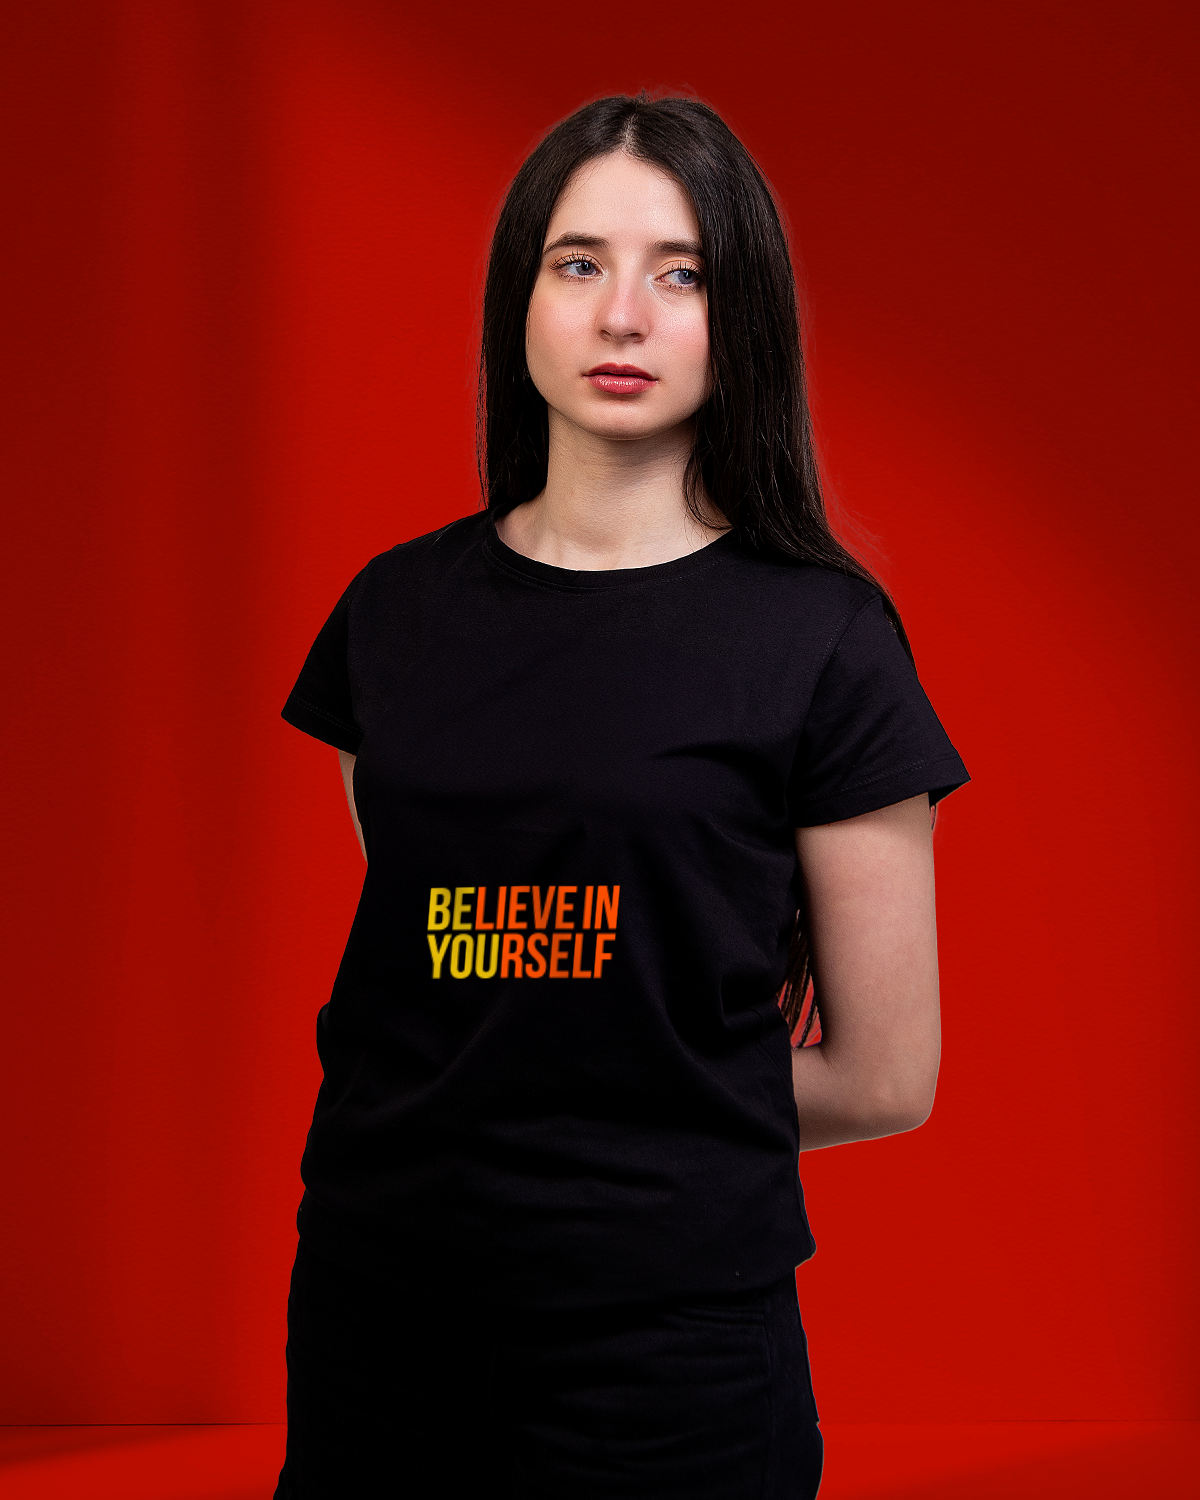 T-shirt For Women (Be Lieve In Yourself)